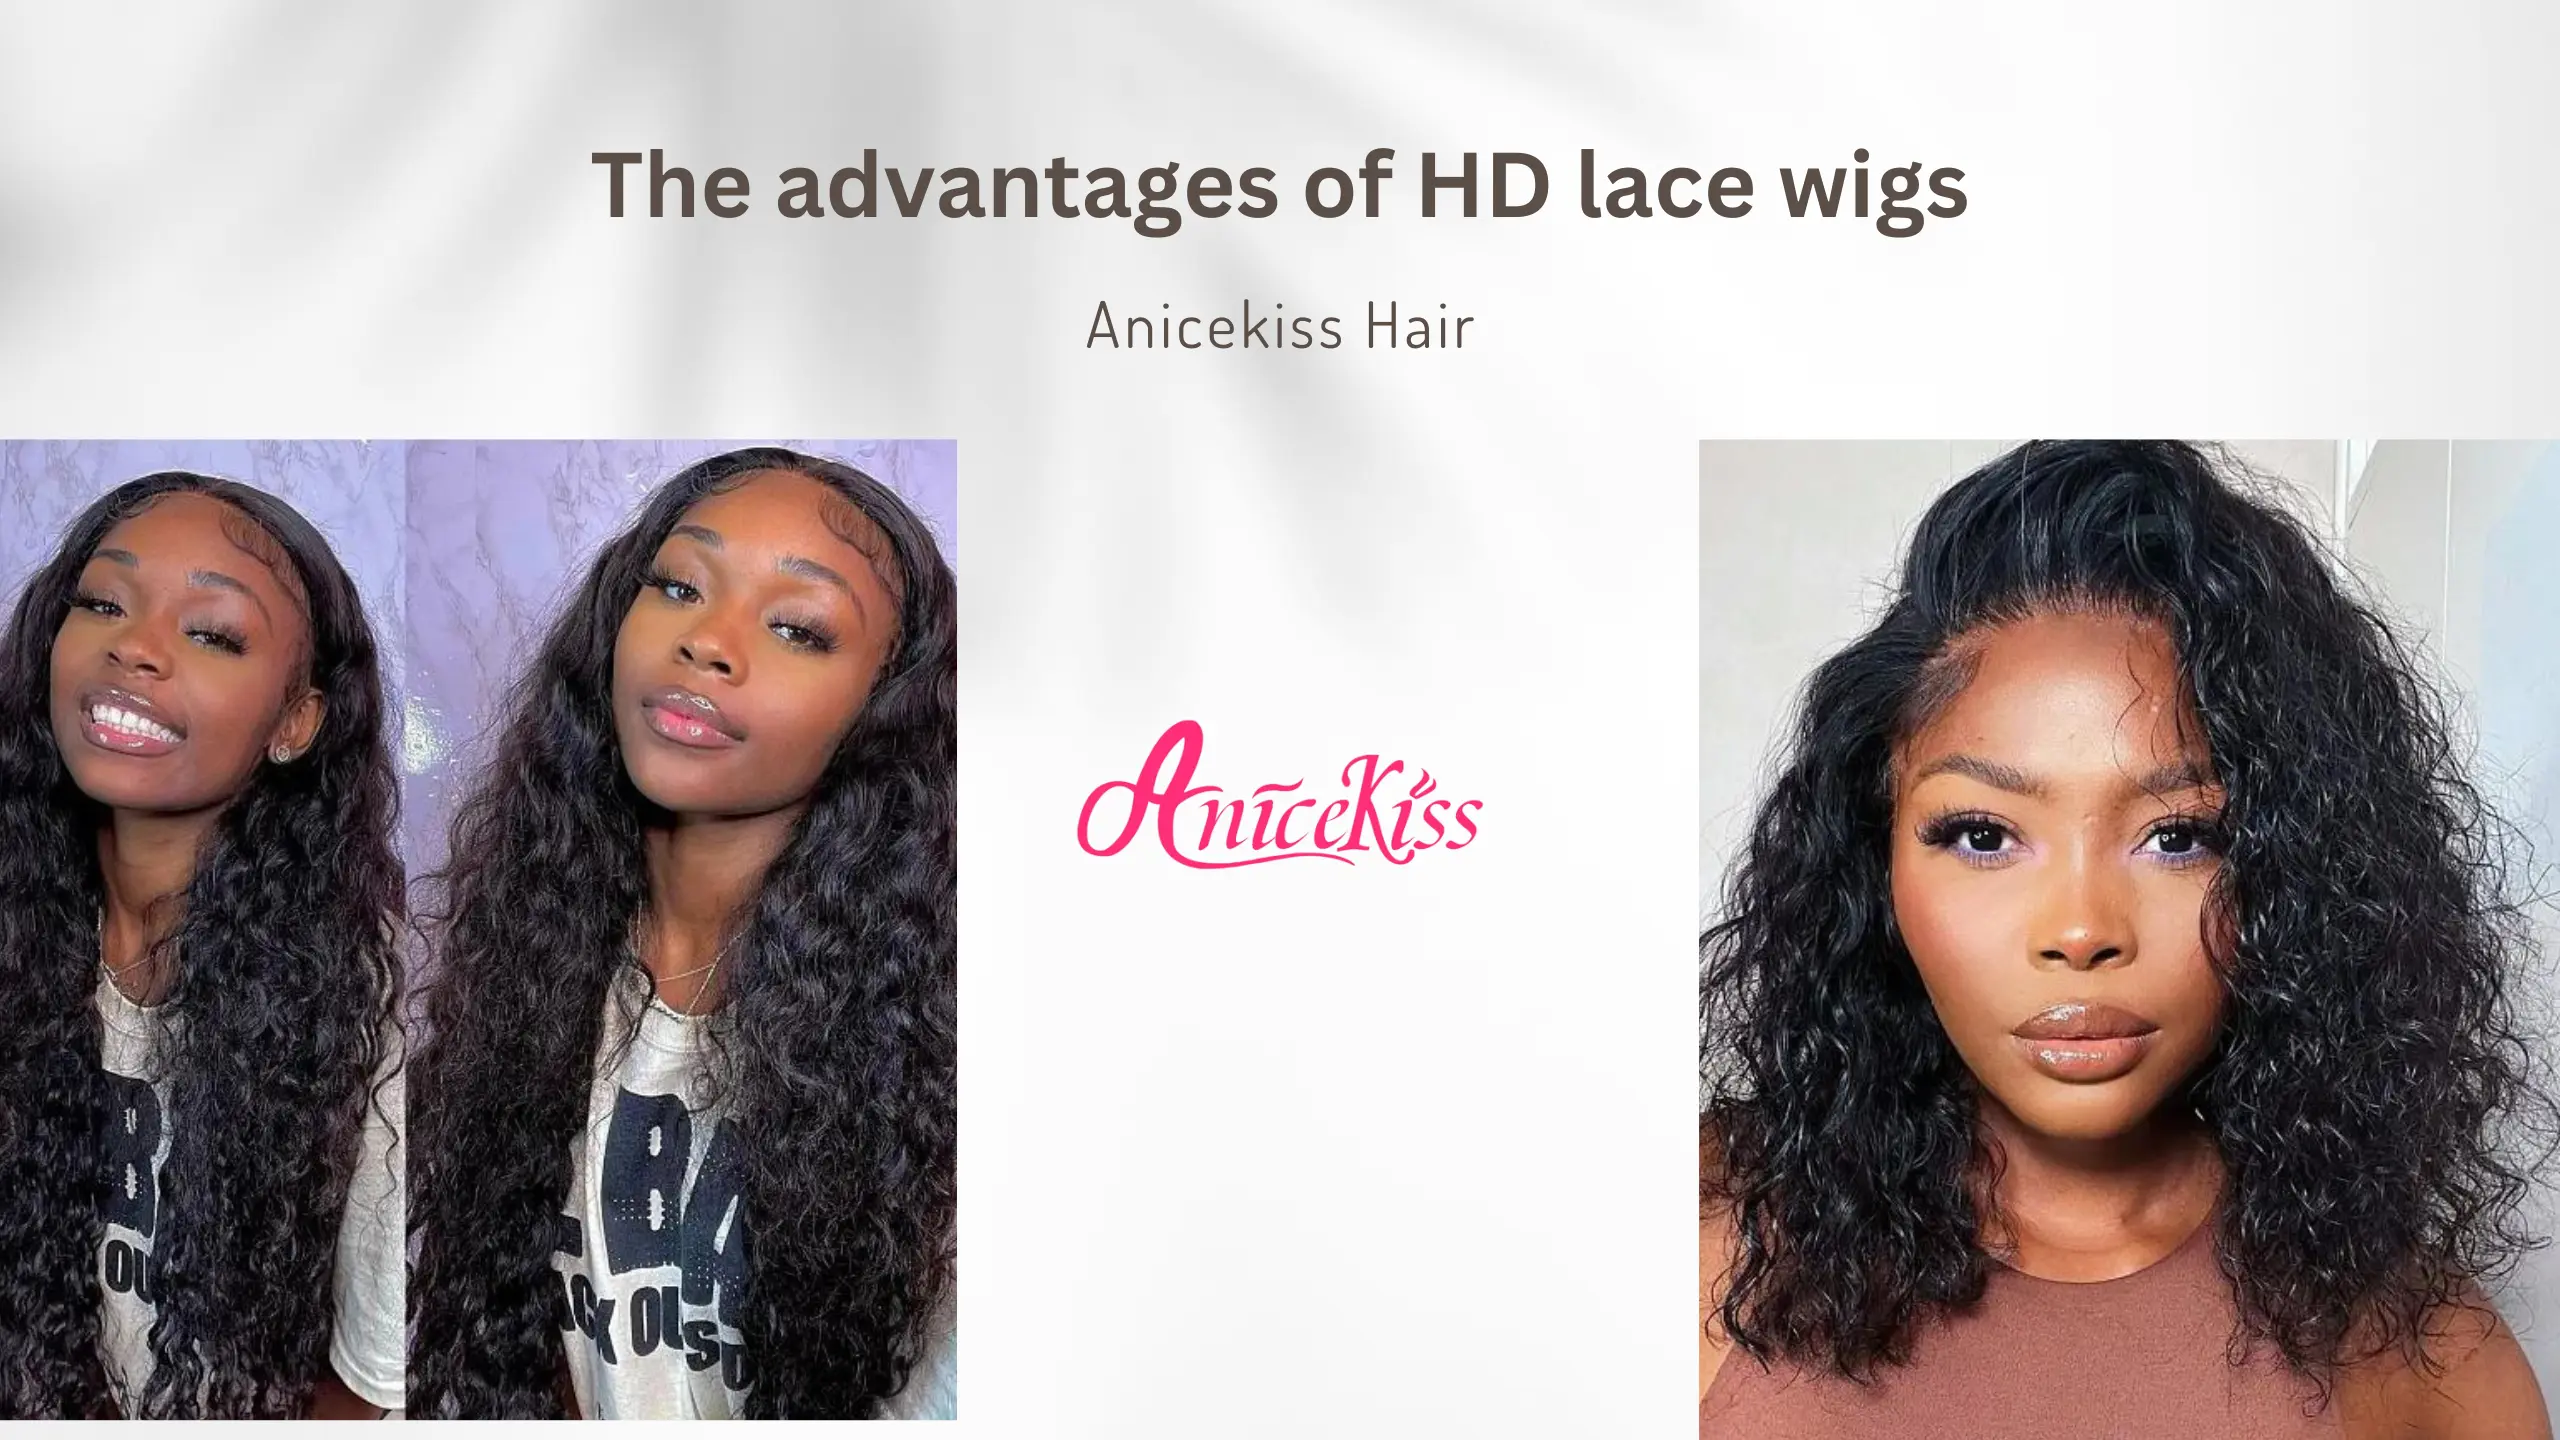 The advantages of HD lace wigs